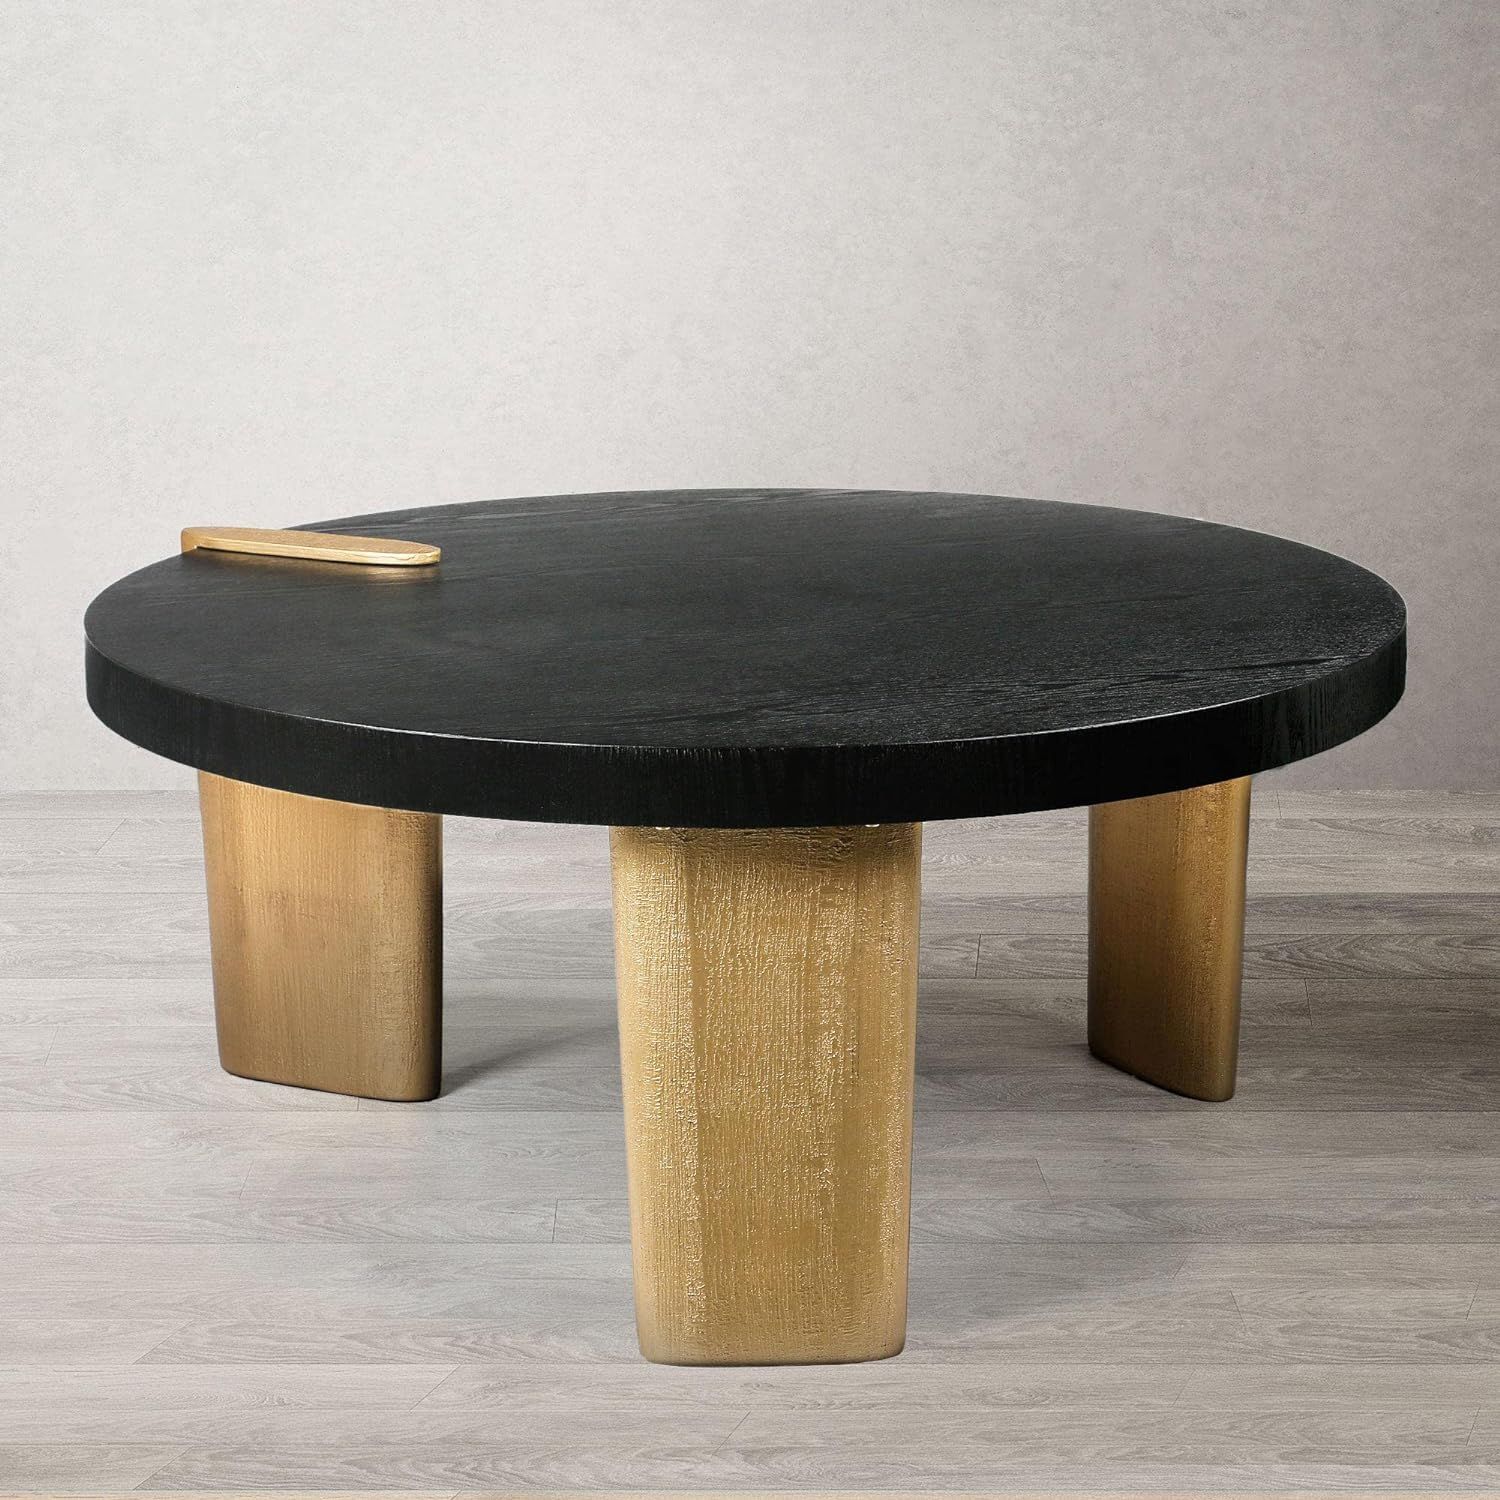 Uolfin Round Coffee Table with Wood Veneer Top and Gold Painted Legs, 17" Diameter | Amazon (US)